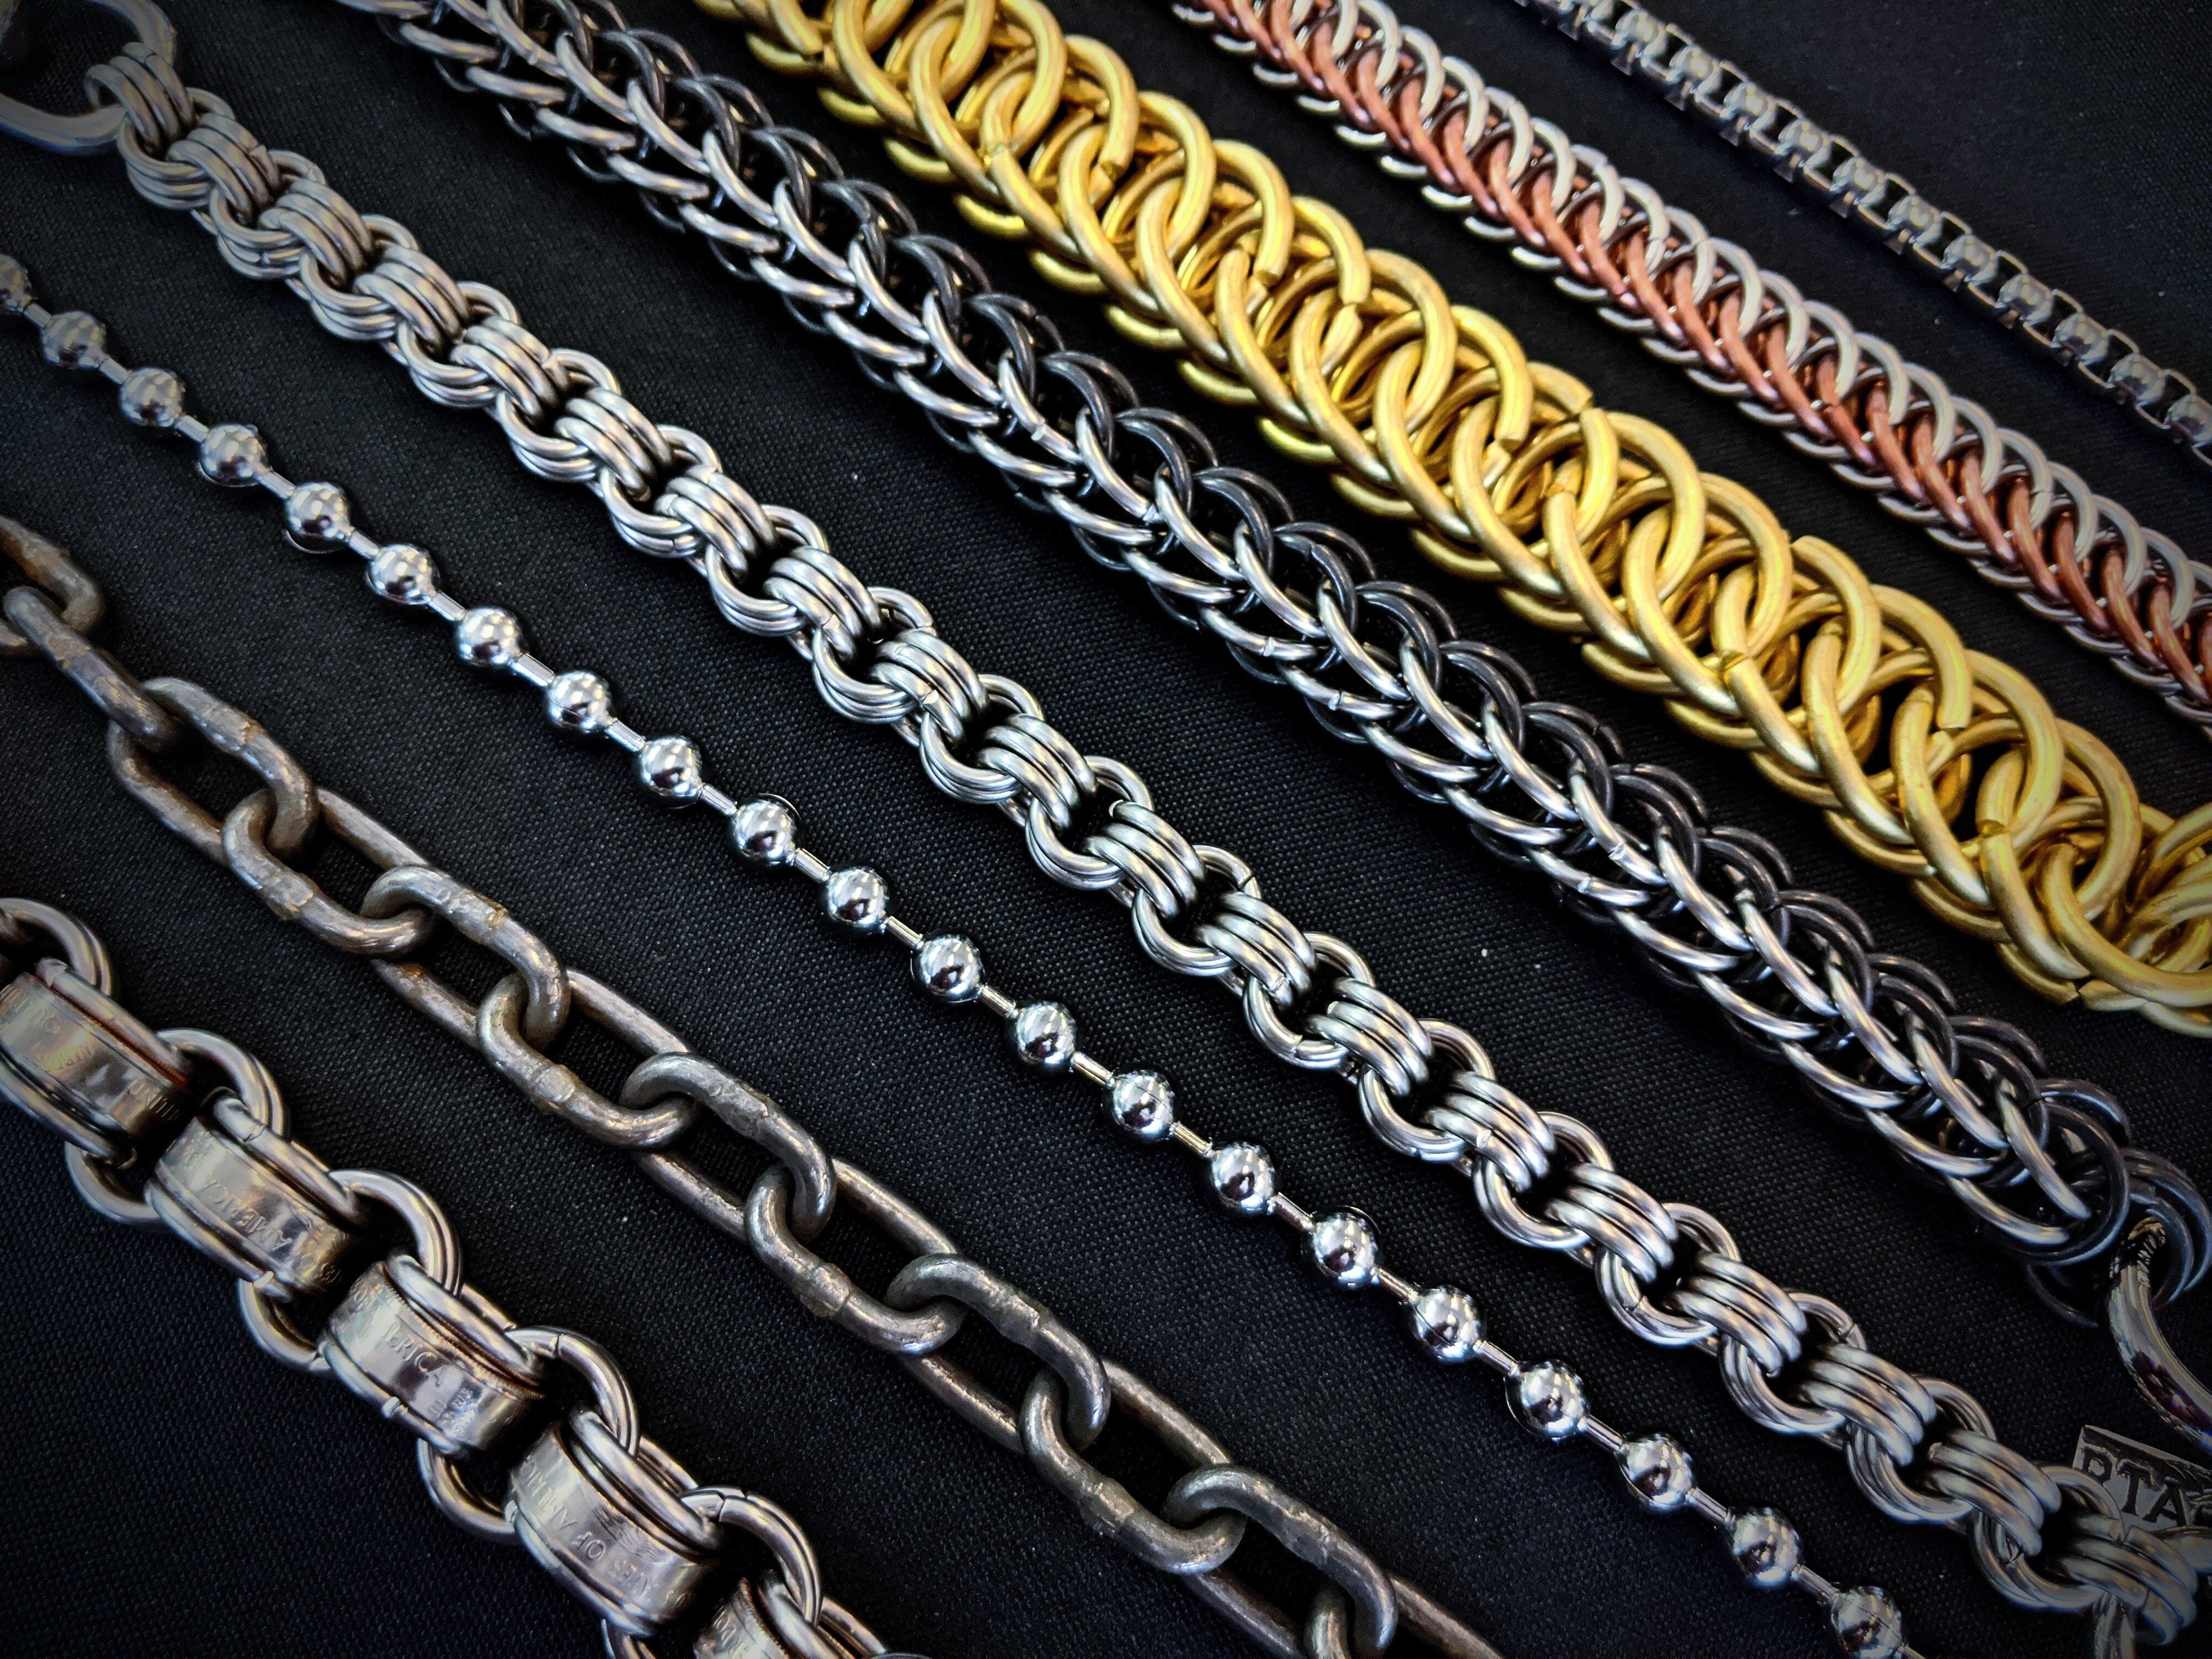 Gibson Wallet - Chain Options Available – Ship John